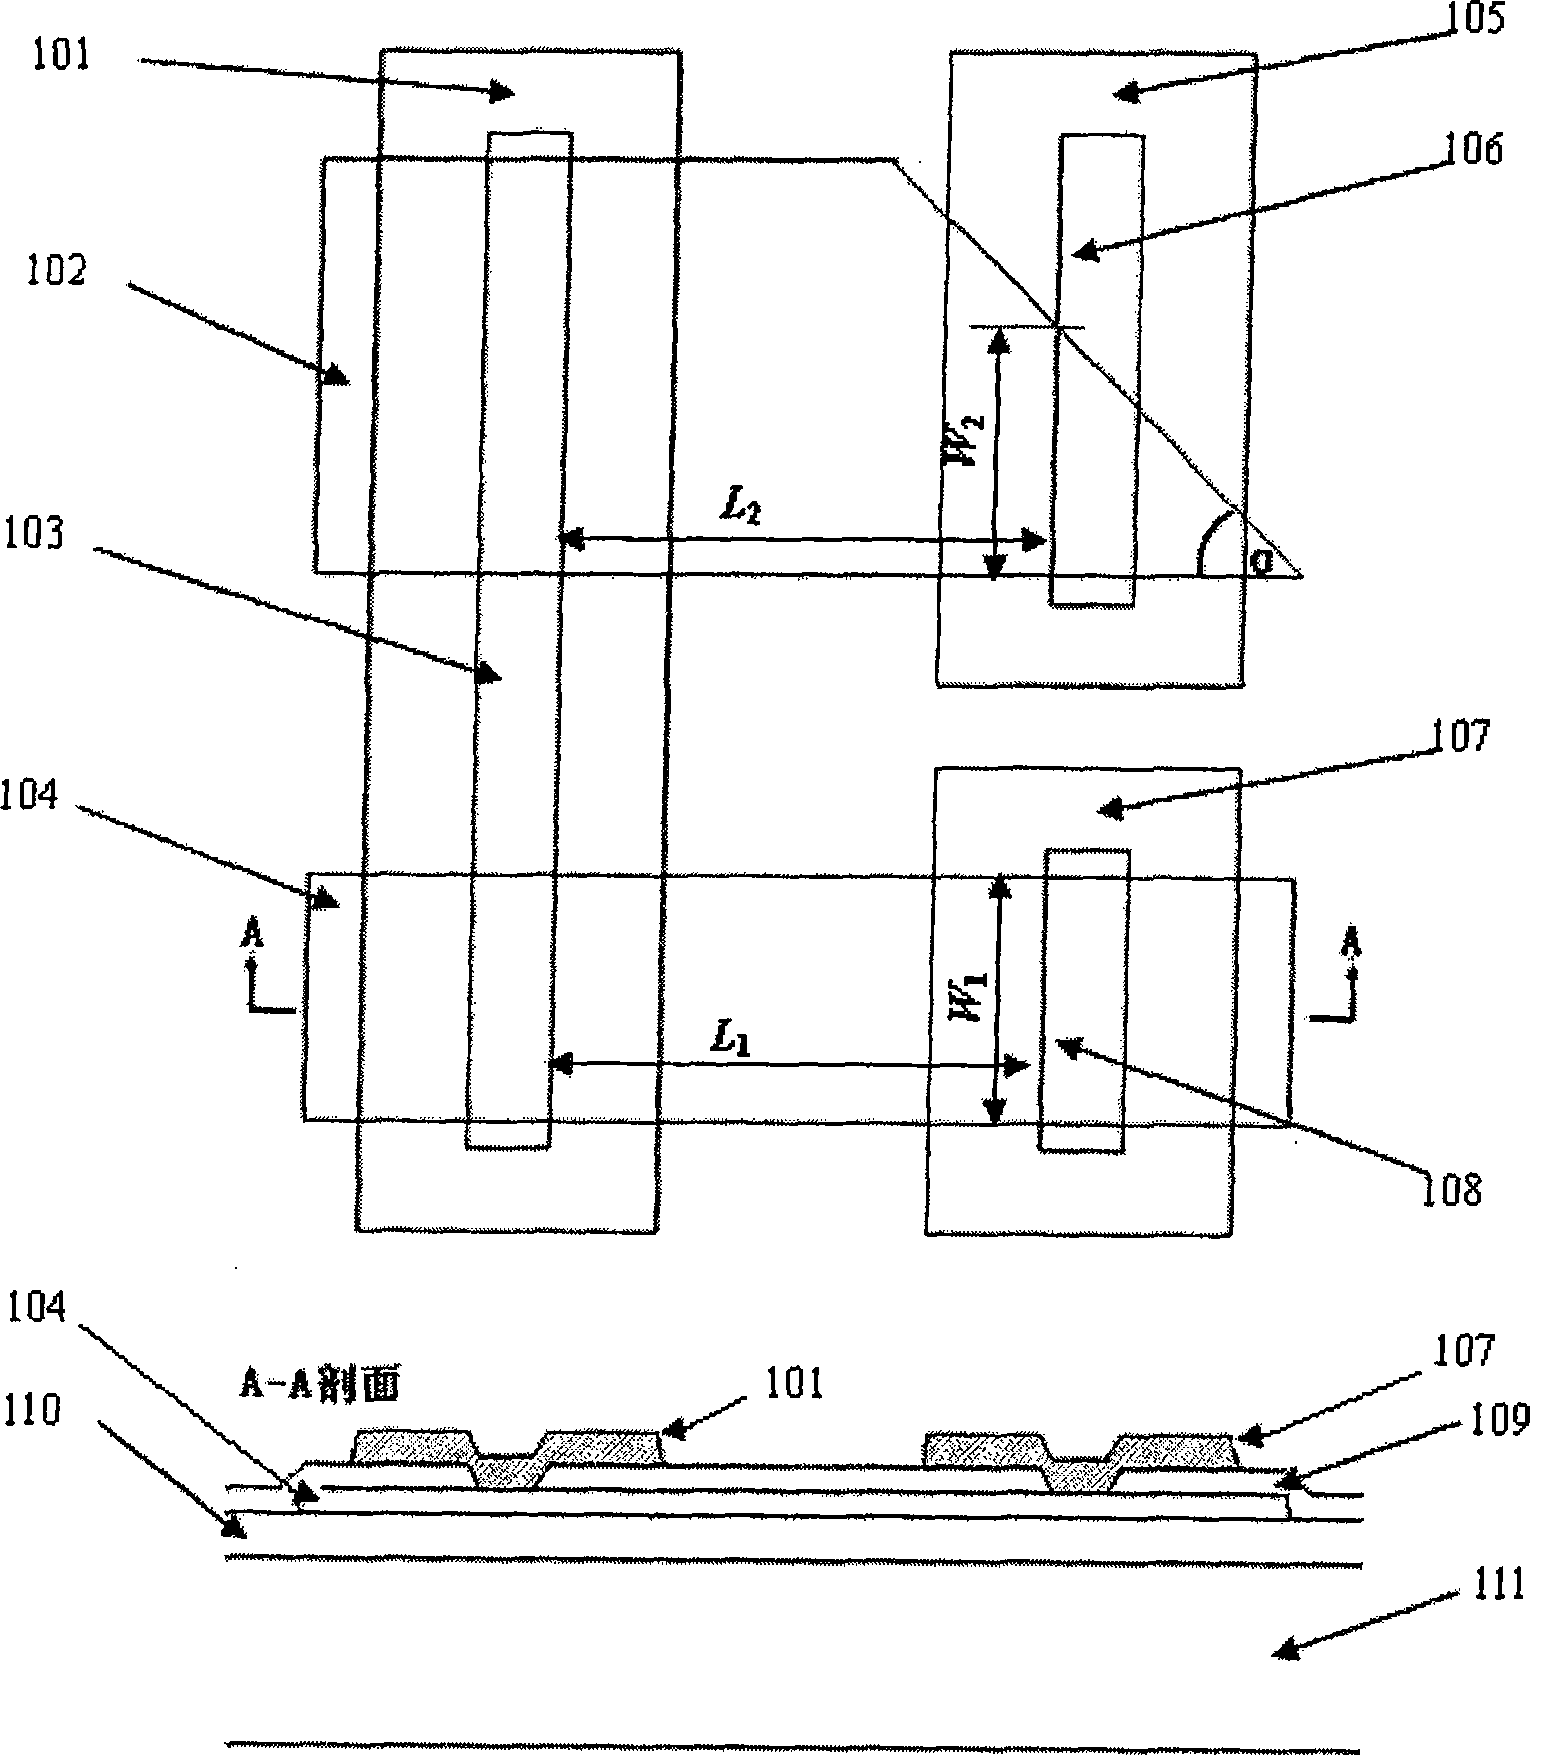 Insulation layer and semiconductor conducting layer aligning error electrical testing structure in micro-electro-mechanical system